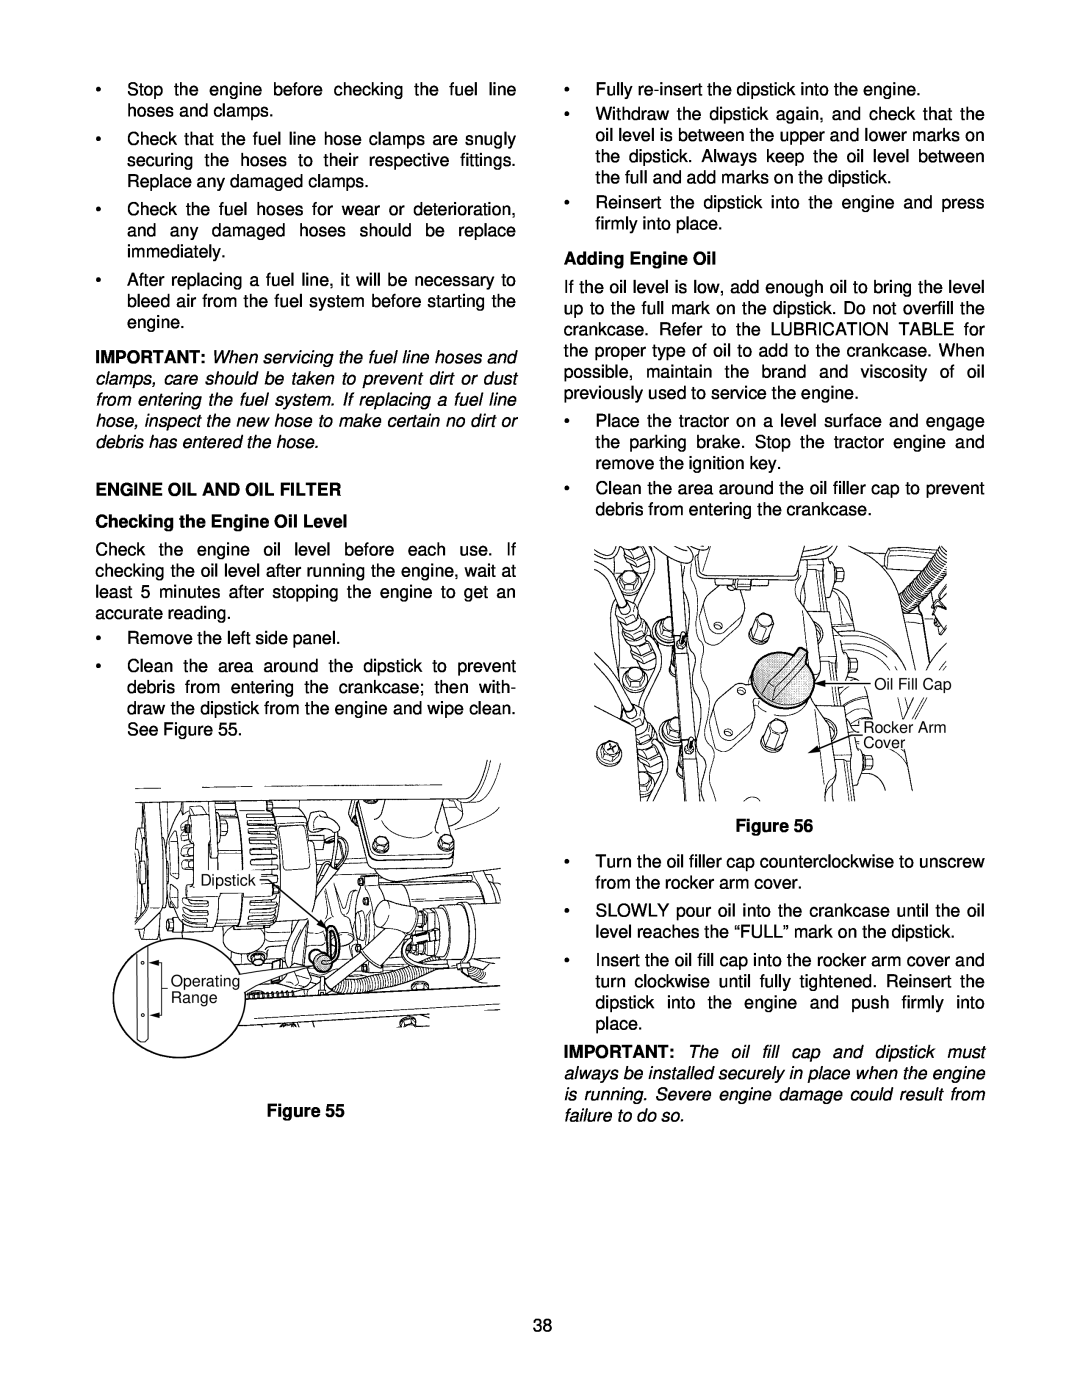 Cub Cadet 8354 manual Engine Oil And Oil Filter, Checking the Engine Oil Level, Figure, Adding Engine Oil 